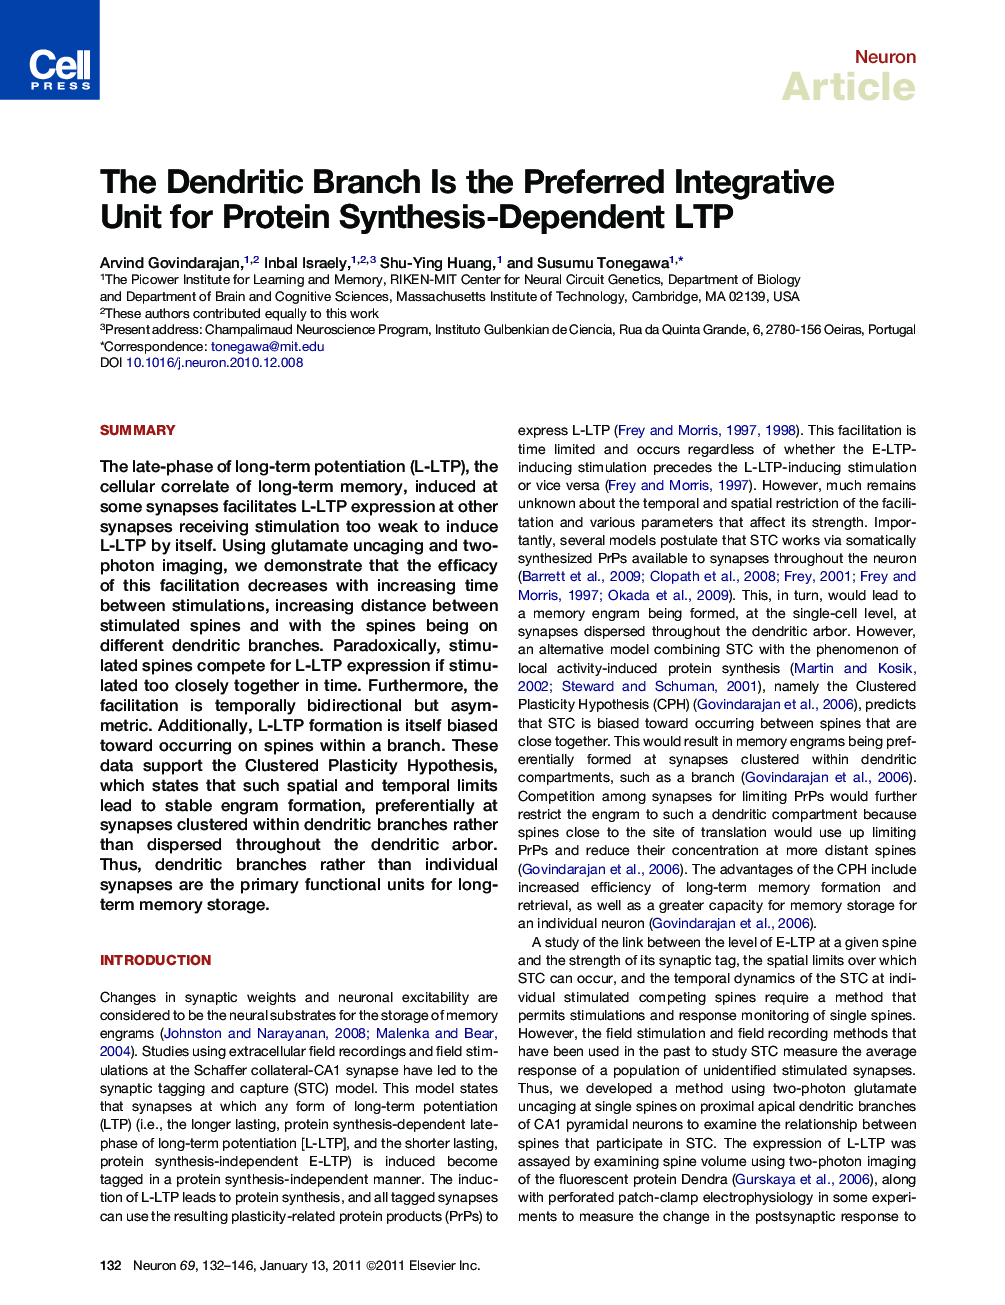 The Dendritic Branch Is the Preferred Integrative Unit for Protein Synthesis-Dependent LTP